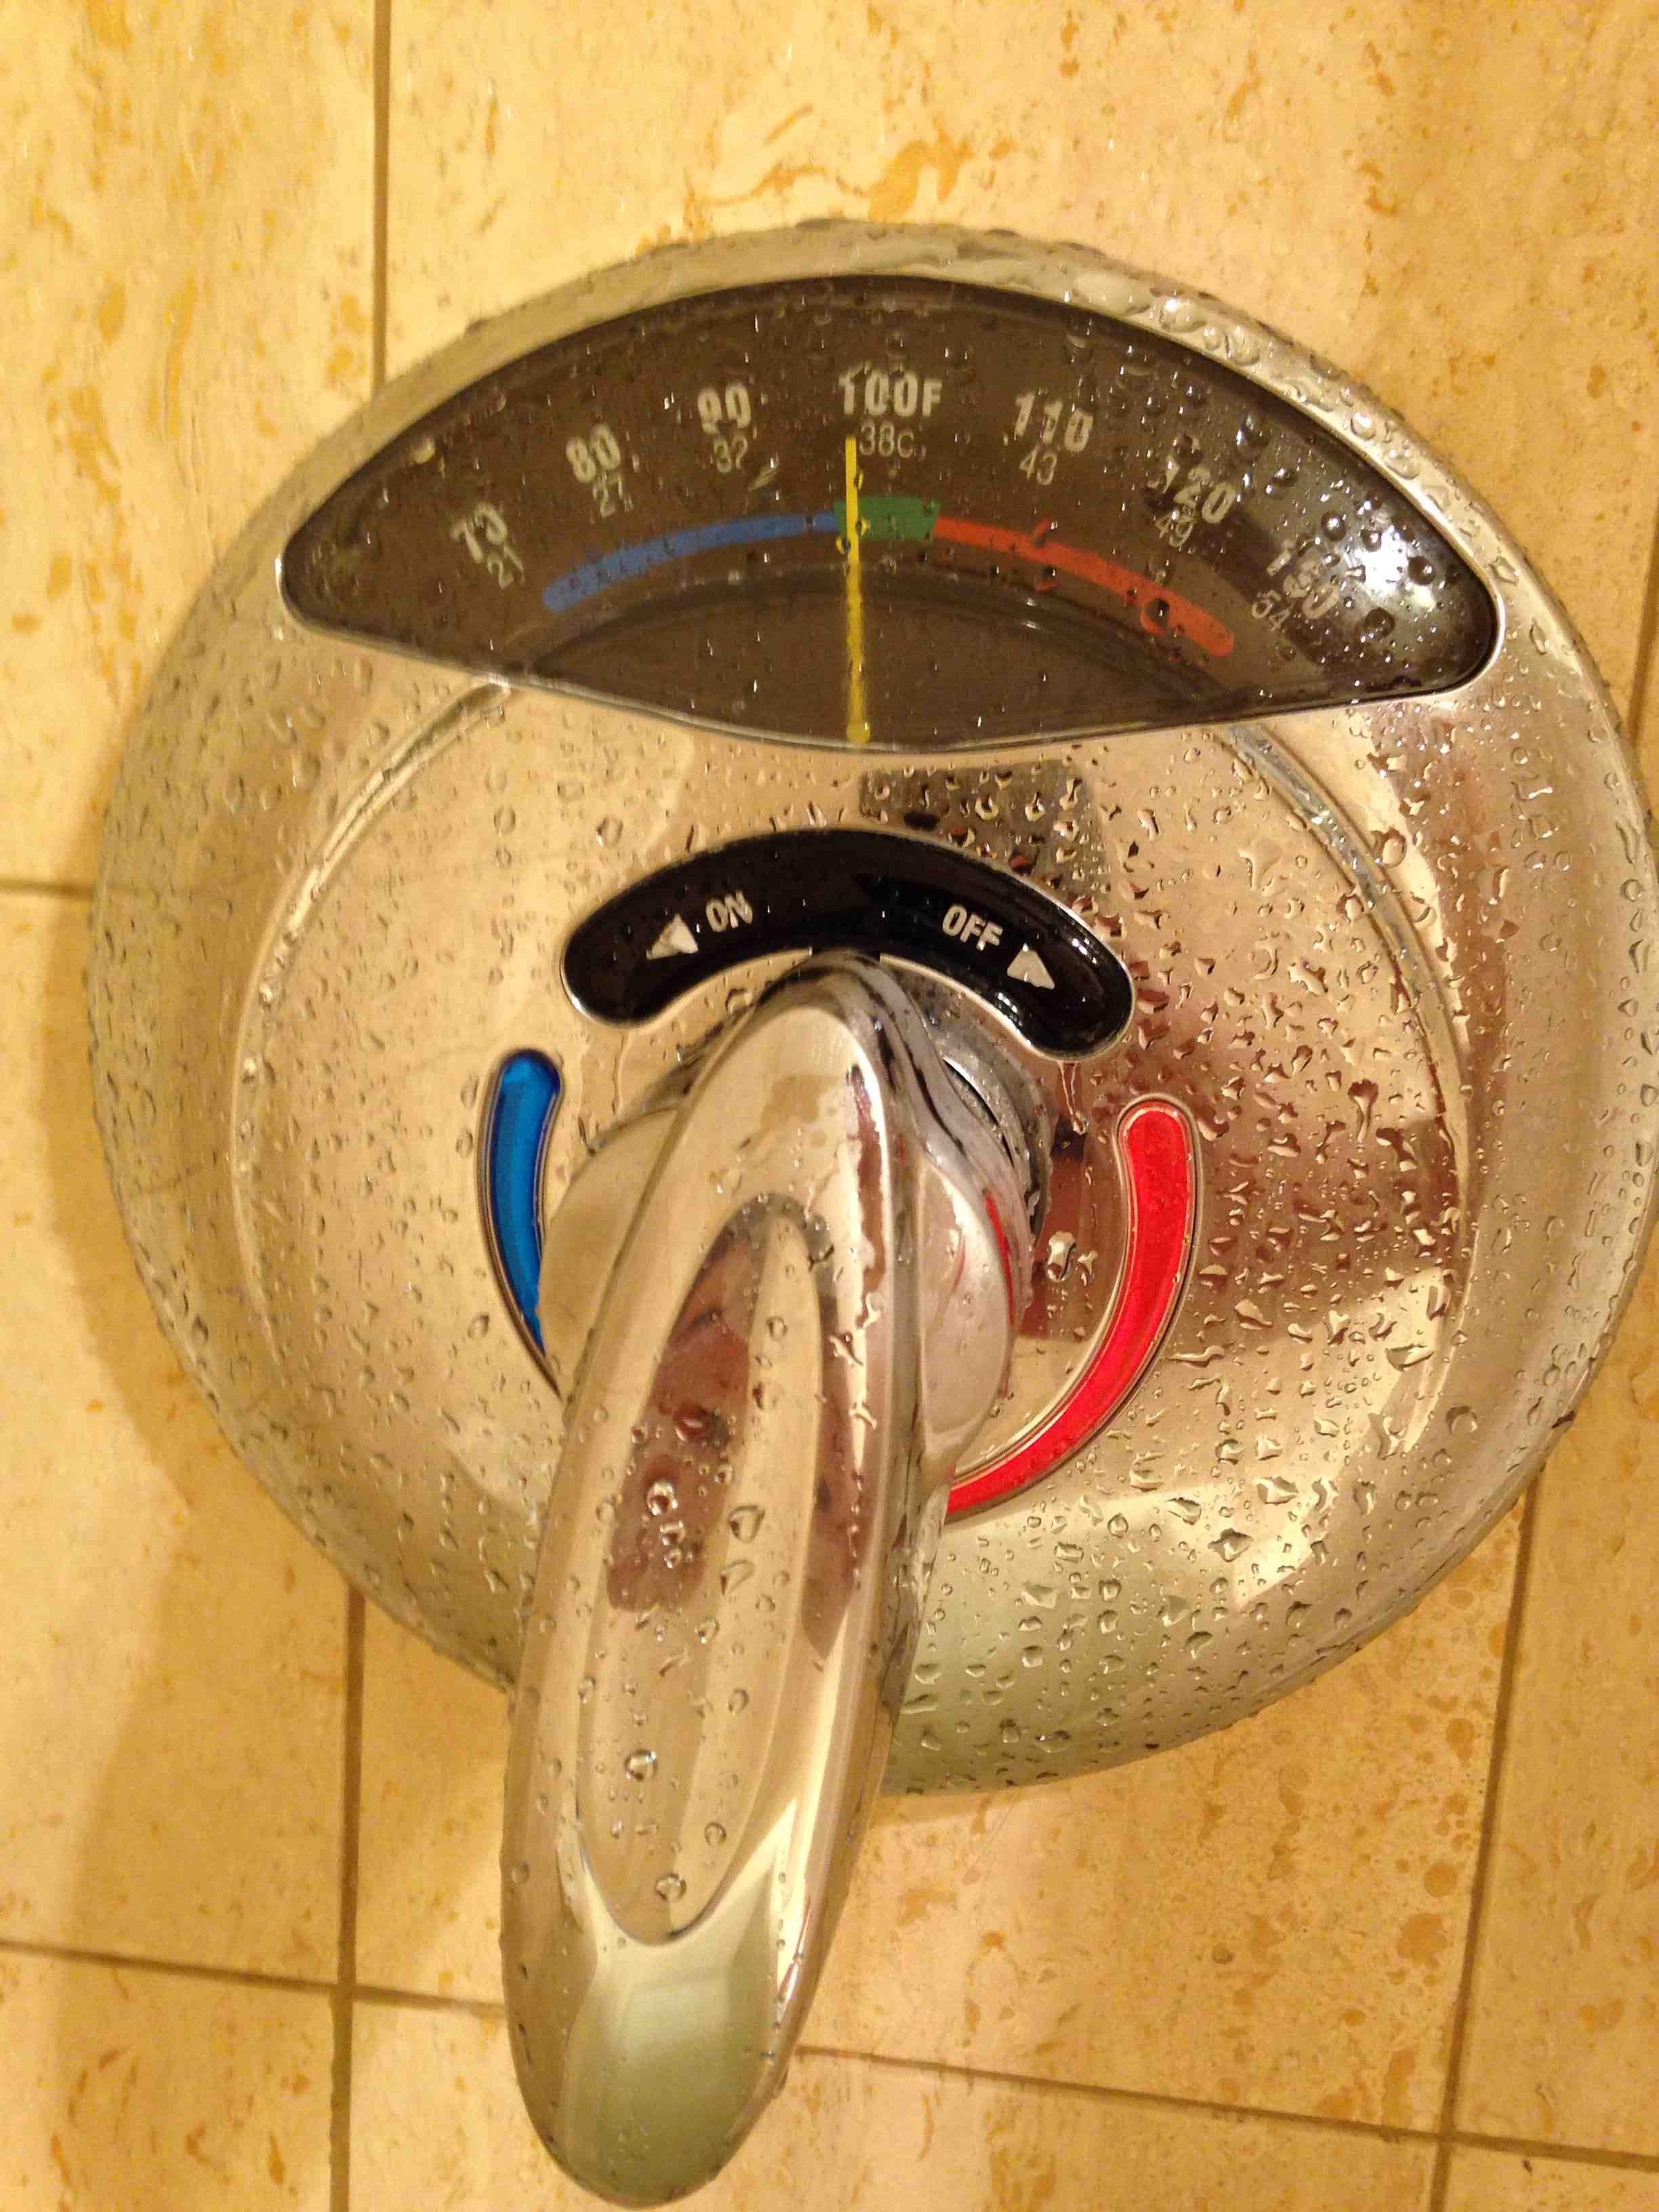 Shower handle with a thermometer